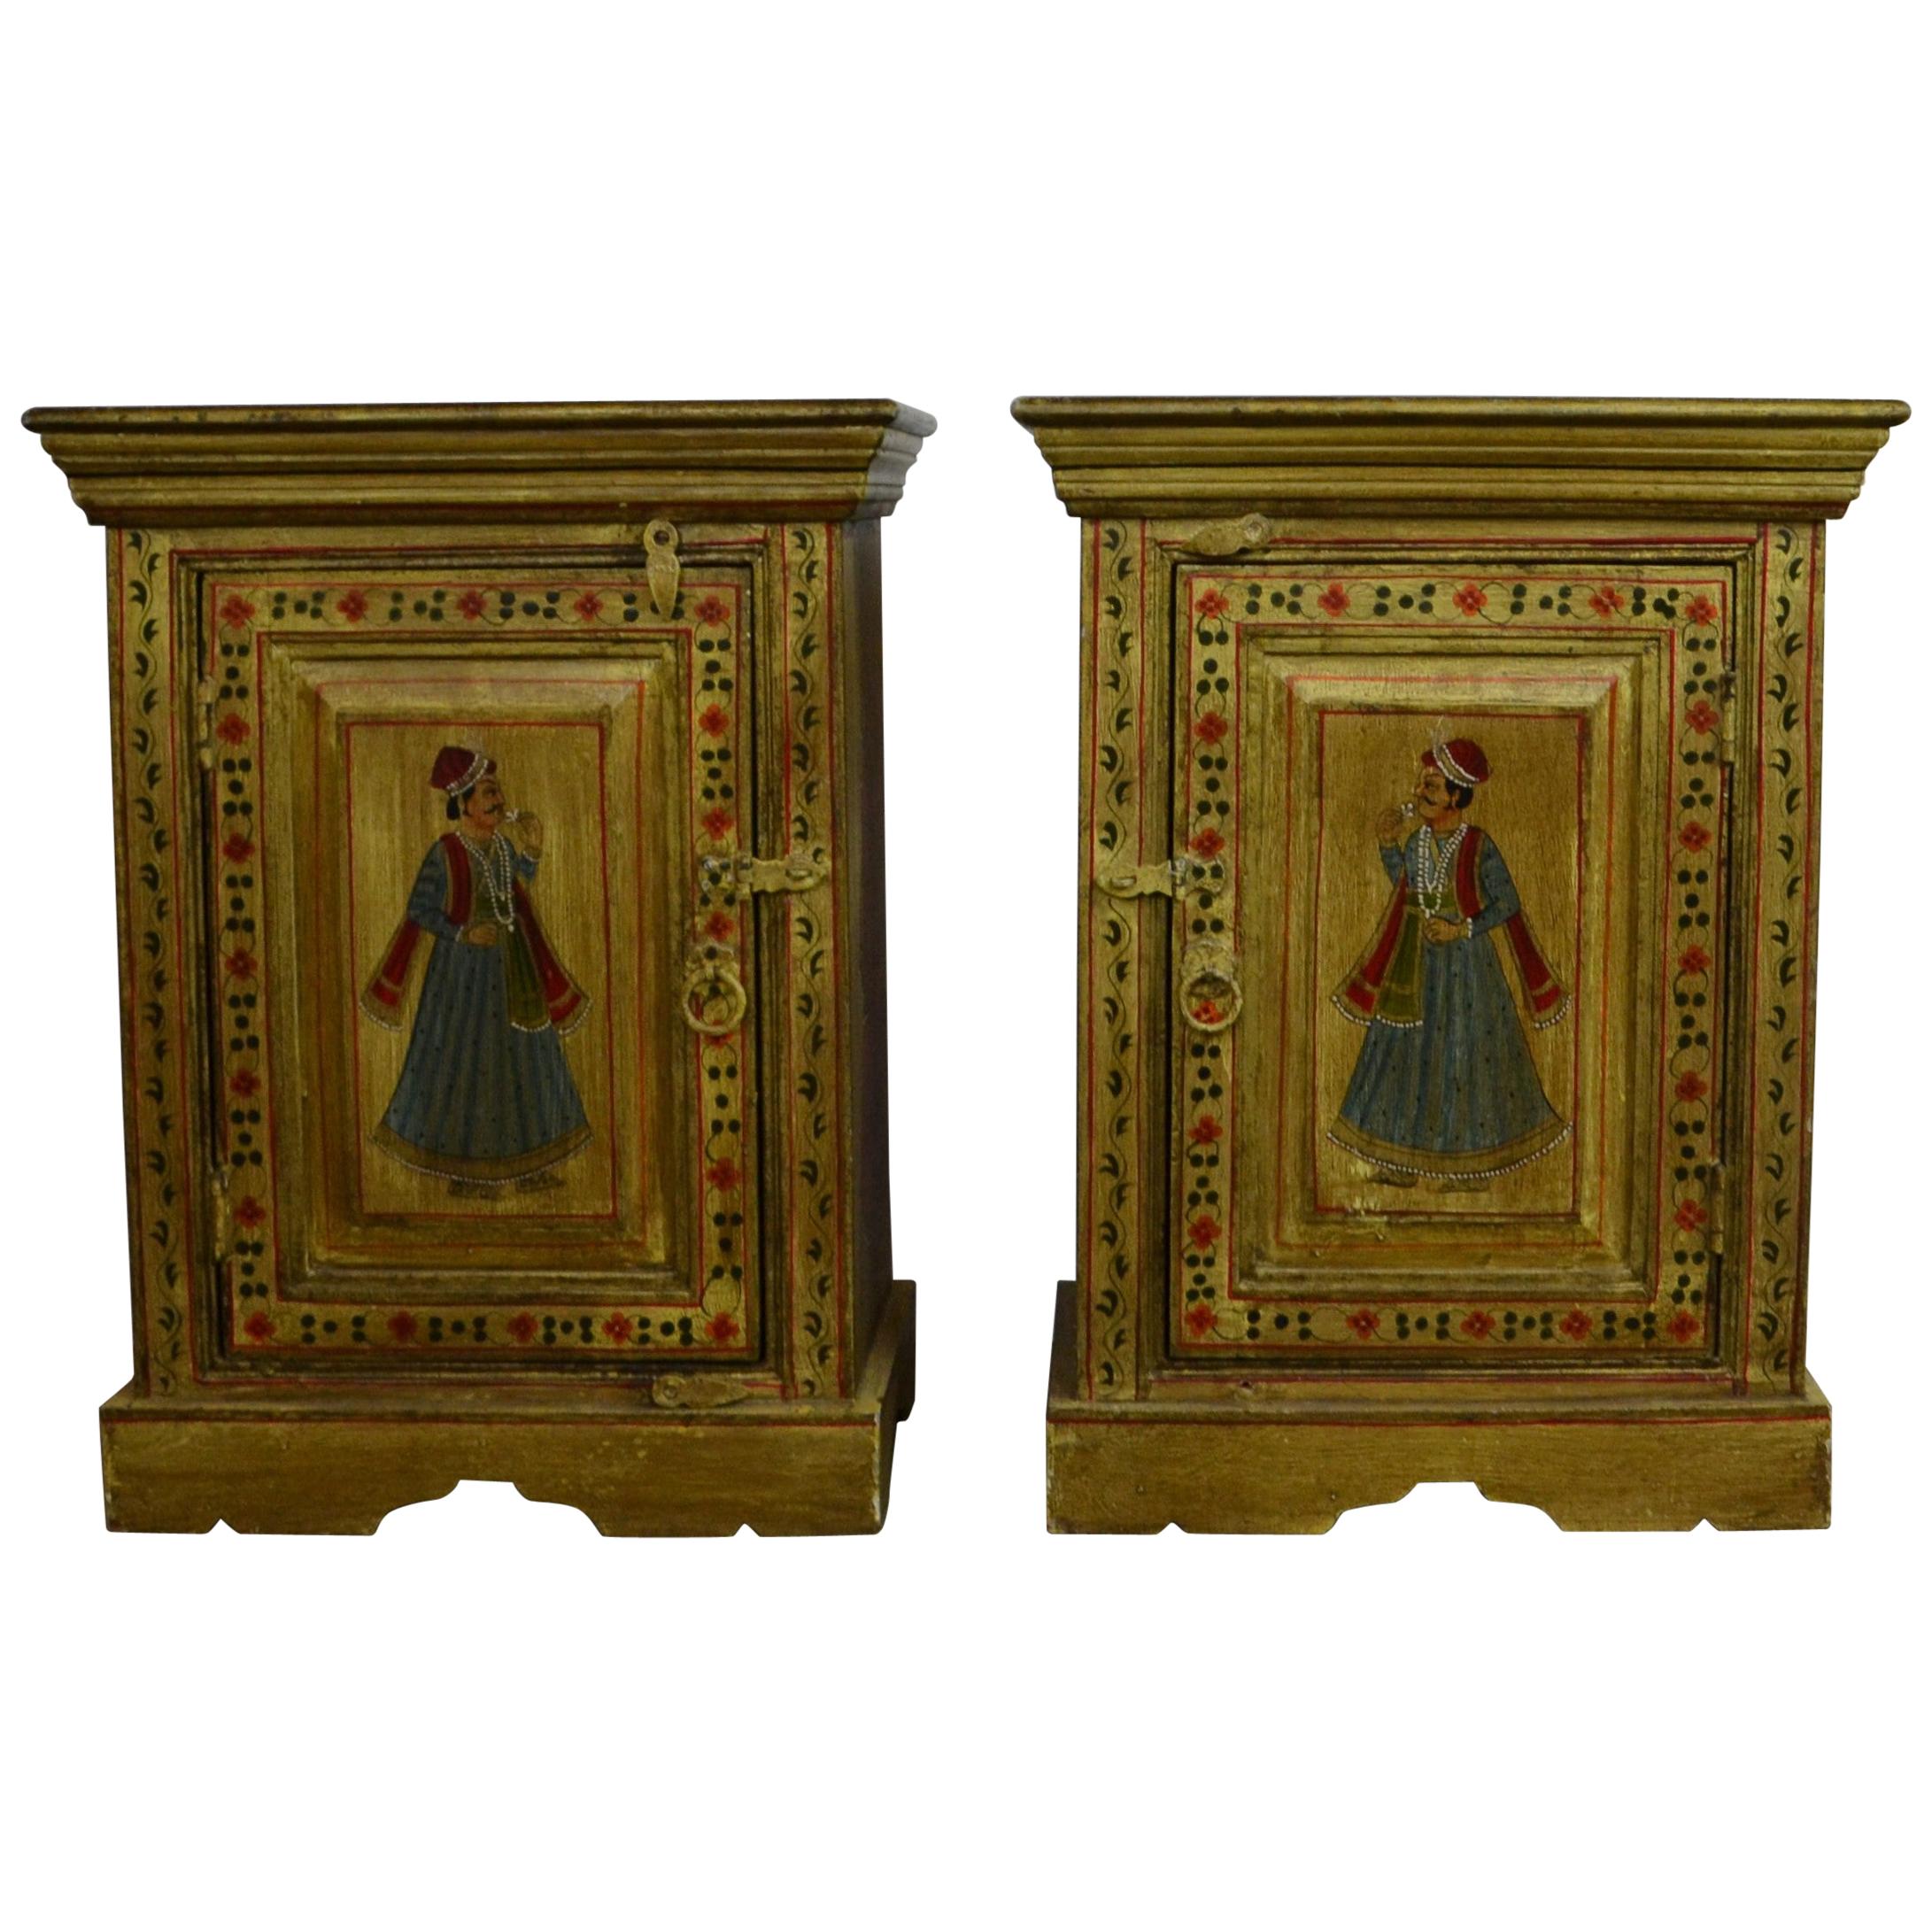 Pair of Indian Cabinet